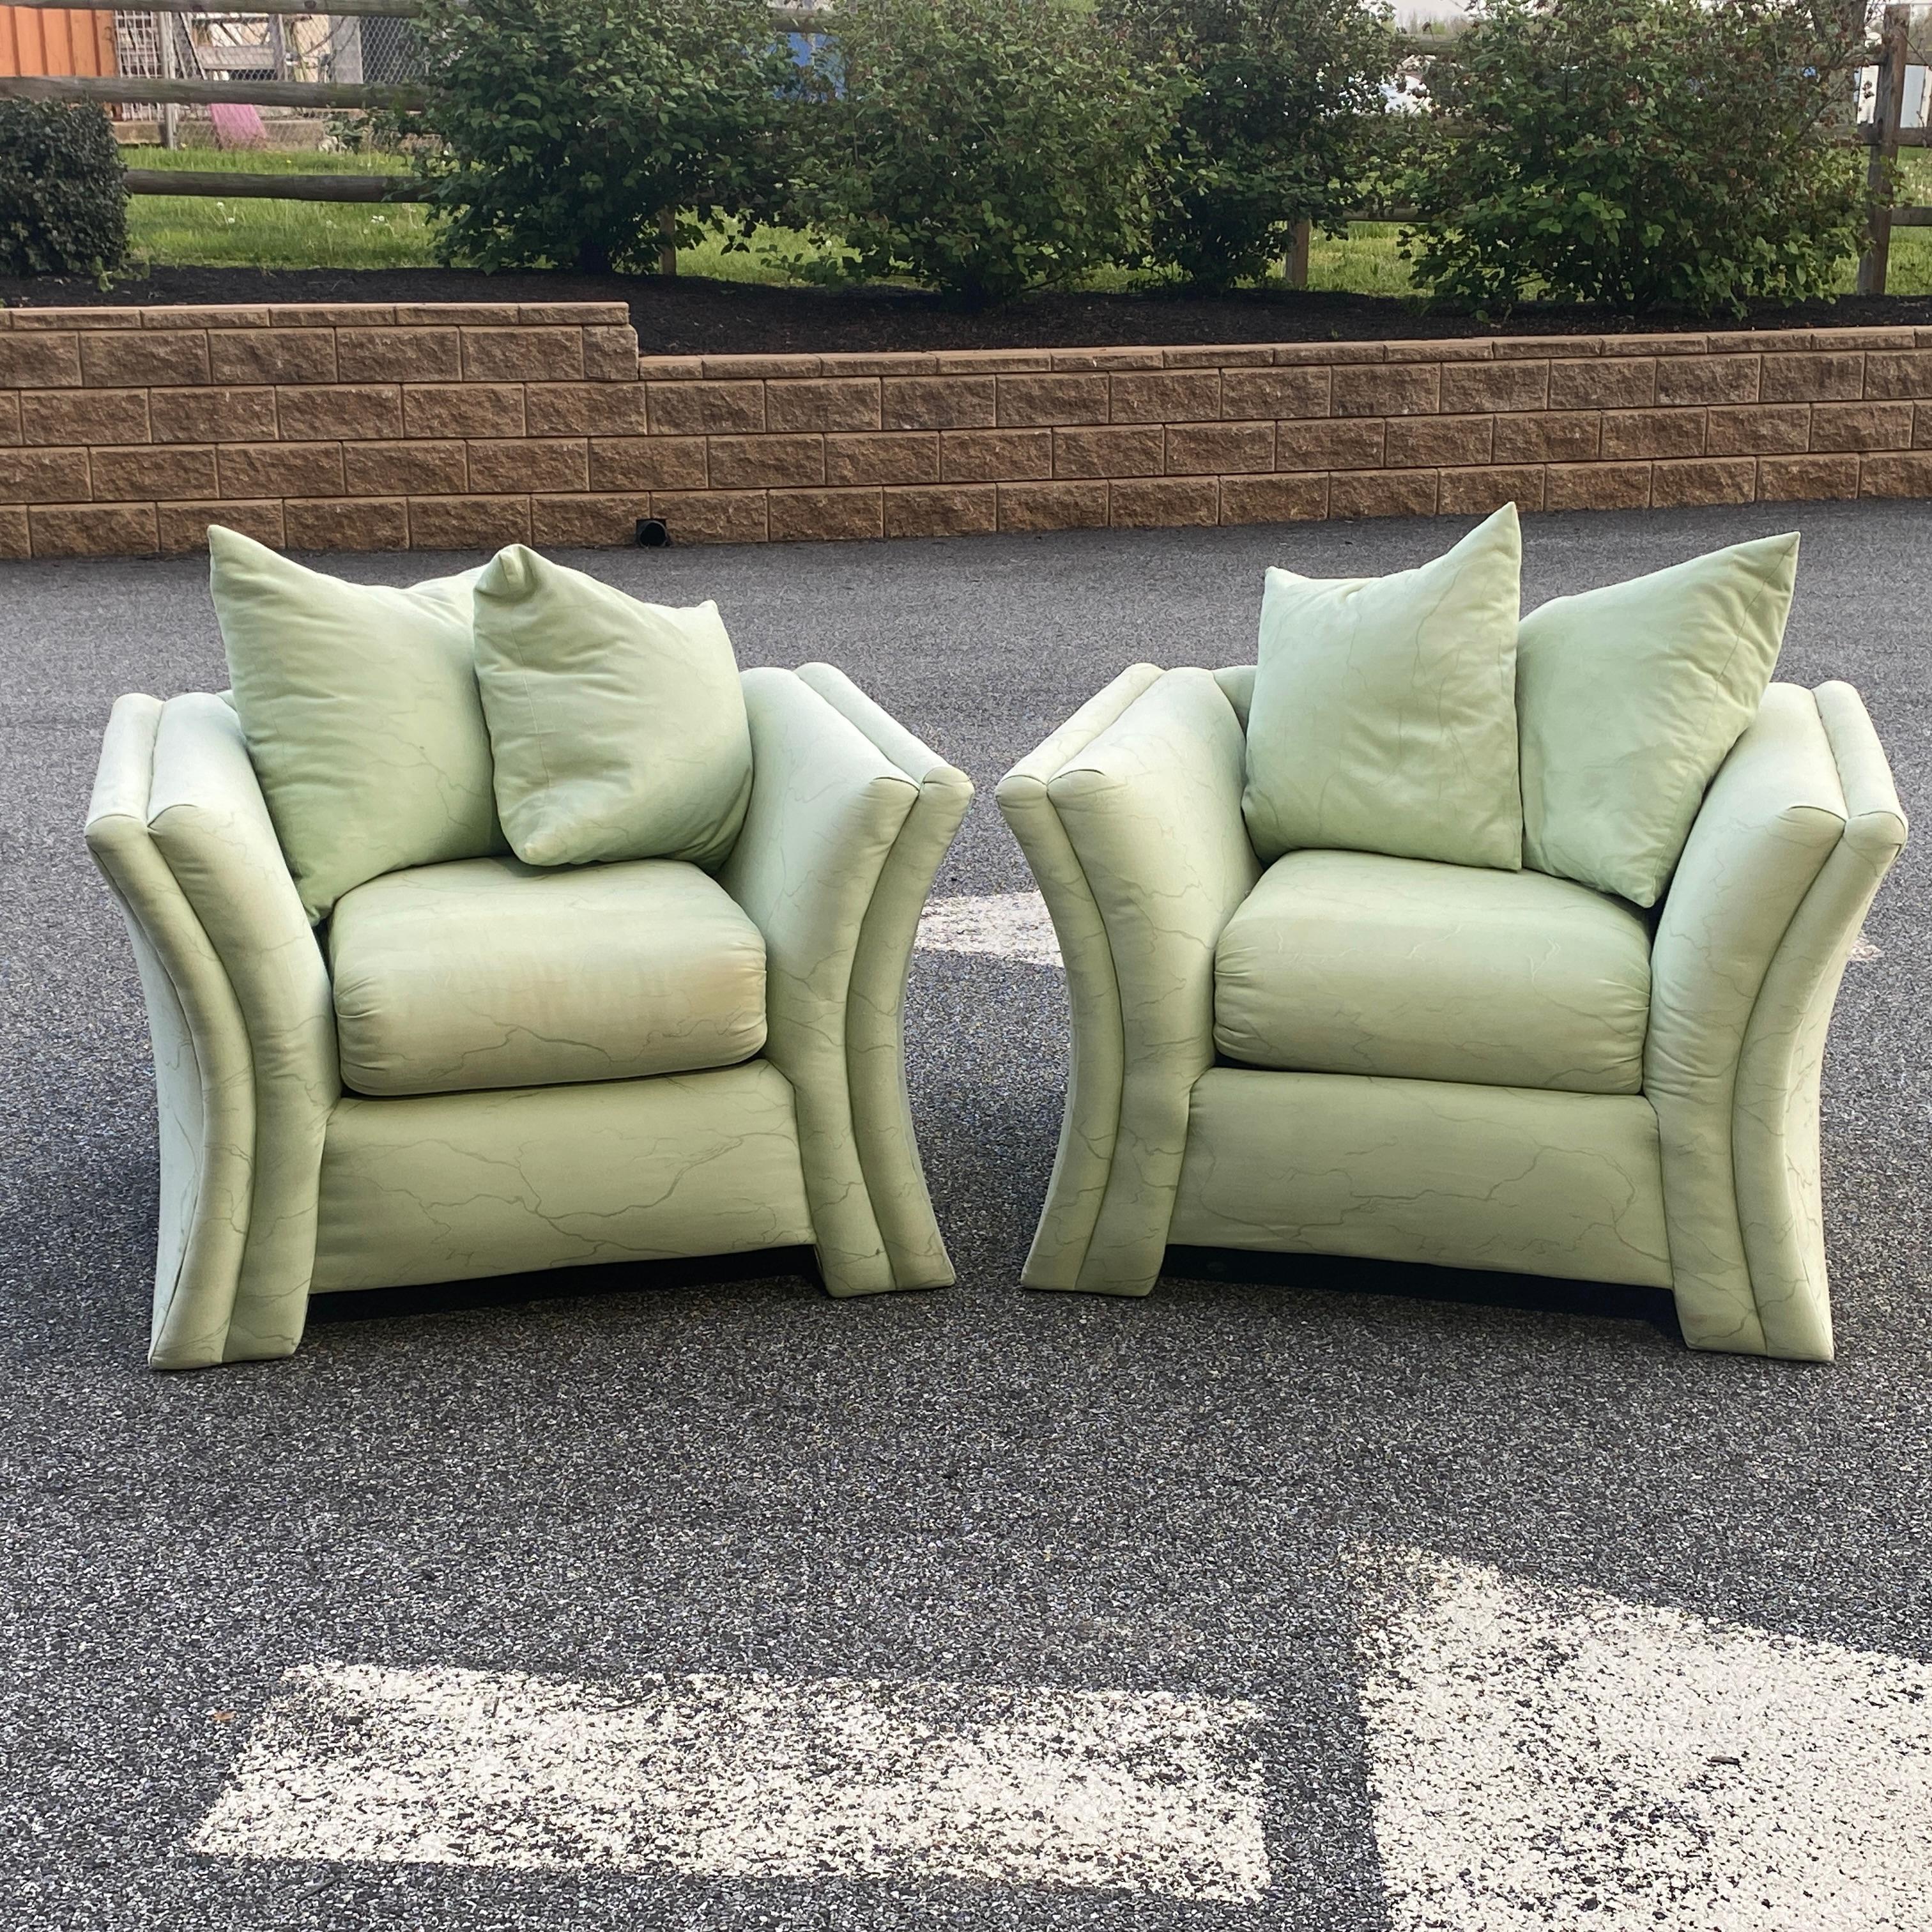 Pair of designer lounge chairs manufactured by Royal Lounge Co. of West Haven, Connecticut featuring curved sides and down pillow backs circa 1985. In need of reupholstering. 